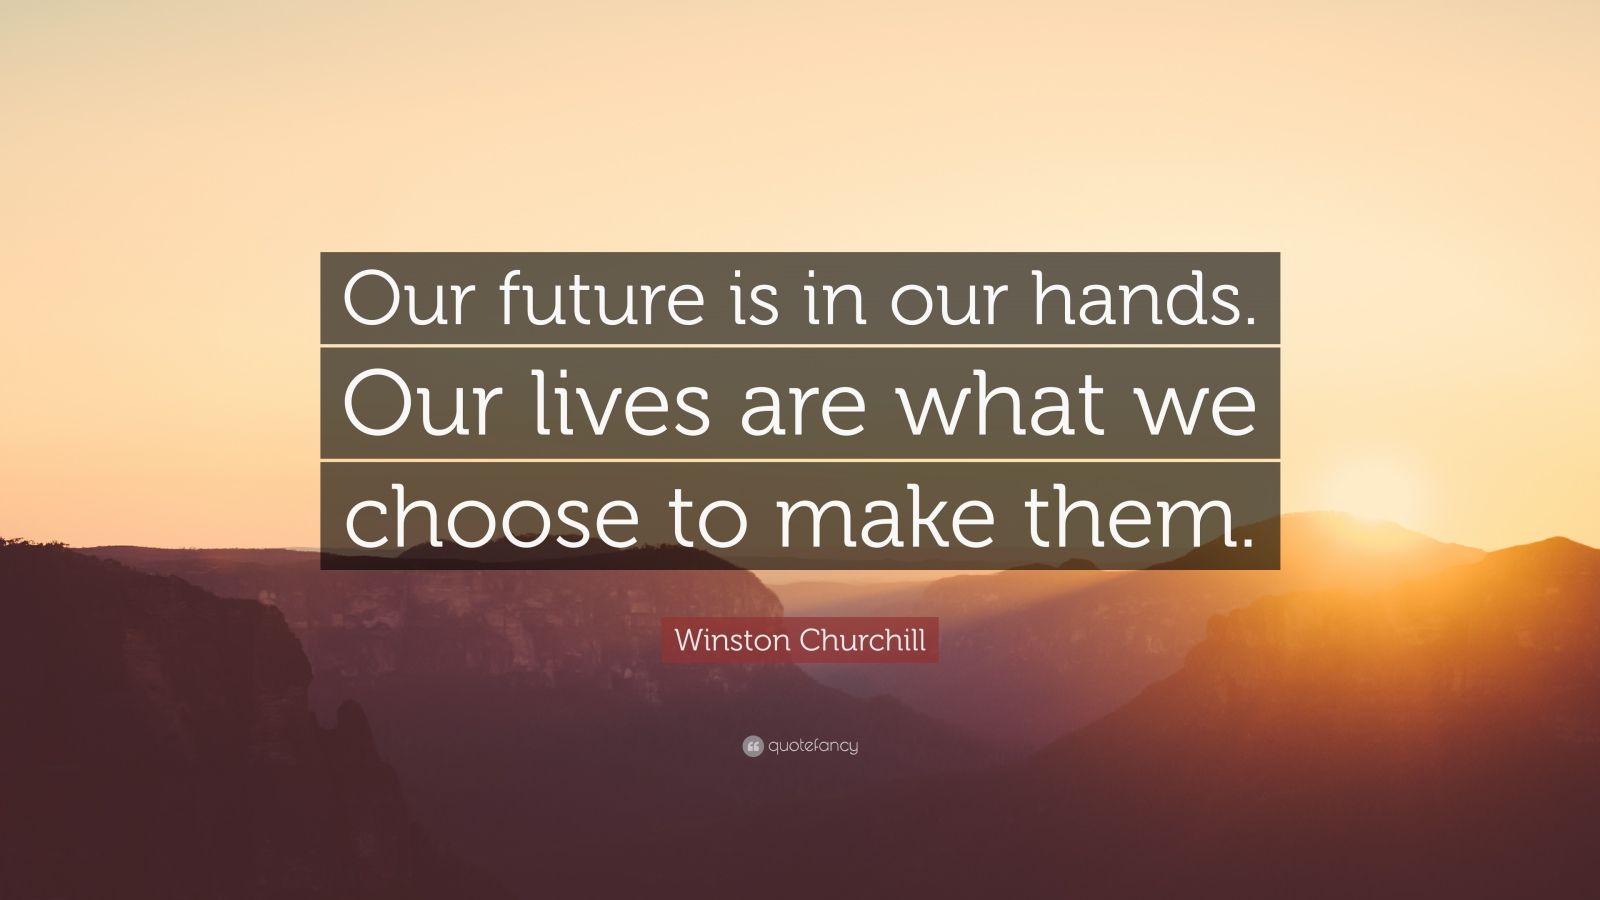 Winston Churchill Quote Our Future Is In Our Hands Our Lives Are What We Choose To Make Them 9 Wallpapers Quotefancy